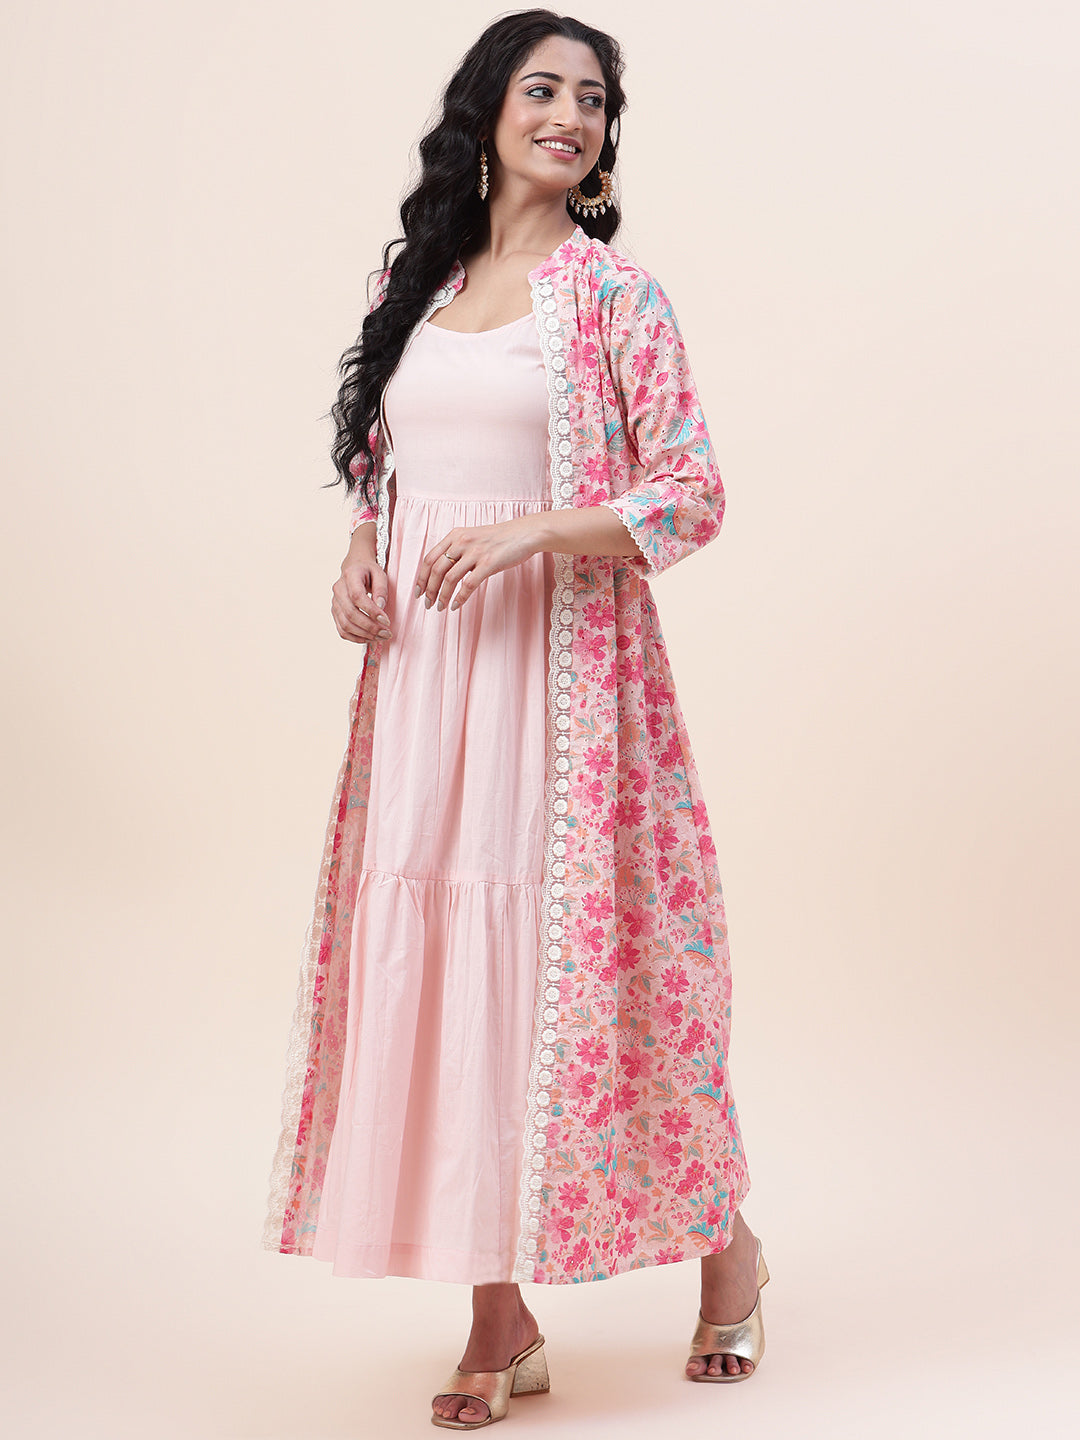 Floral Printed Cotton Gown With Jacket